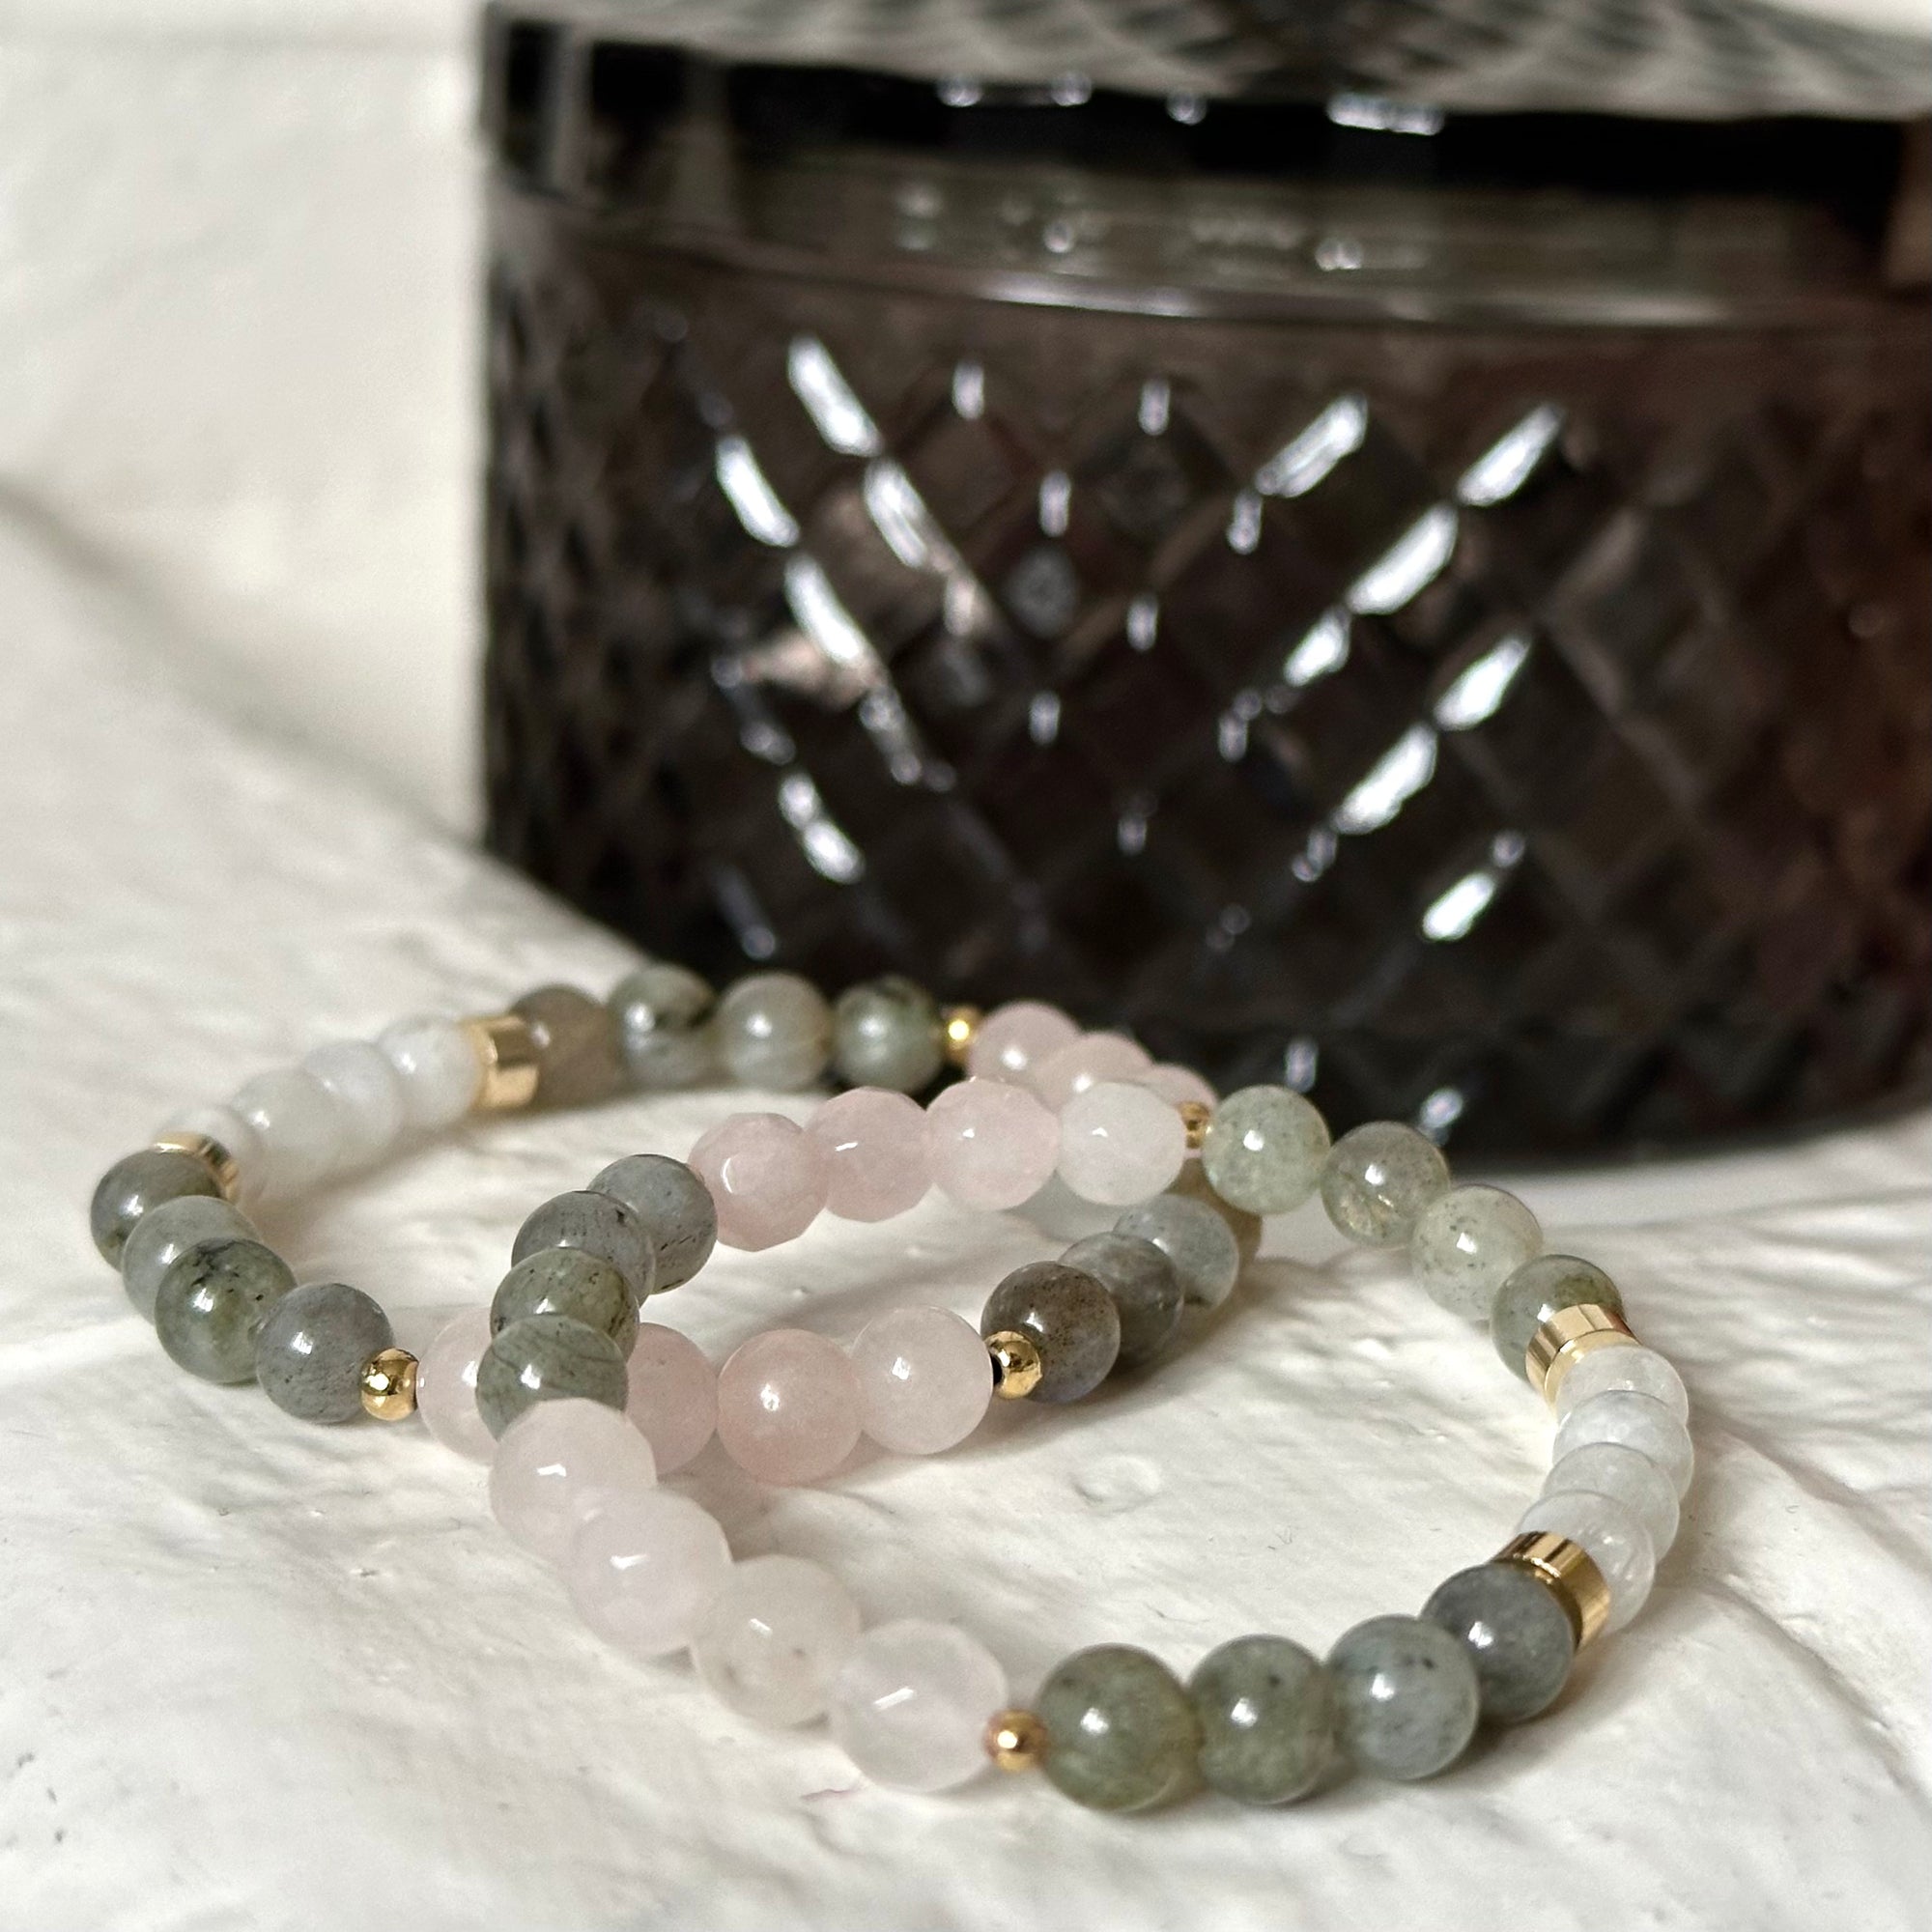 Period Pain Relief Crystal Bracelet